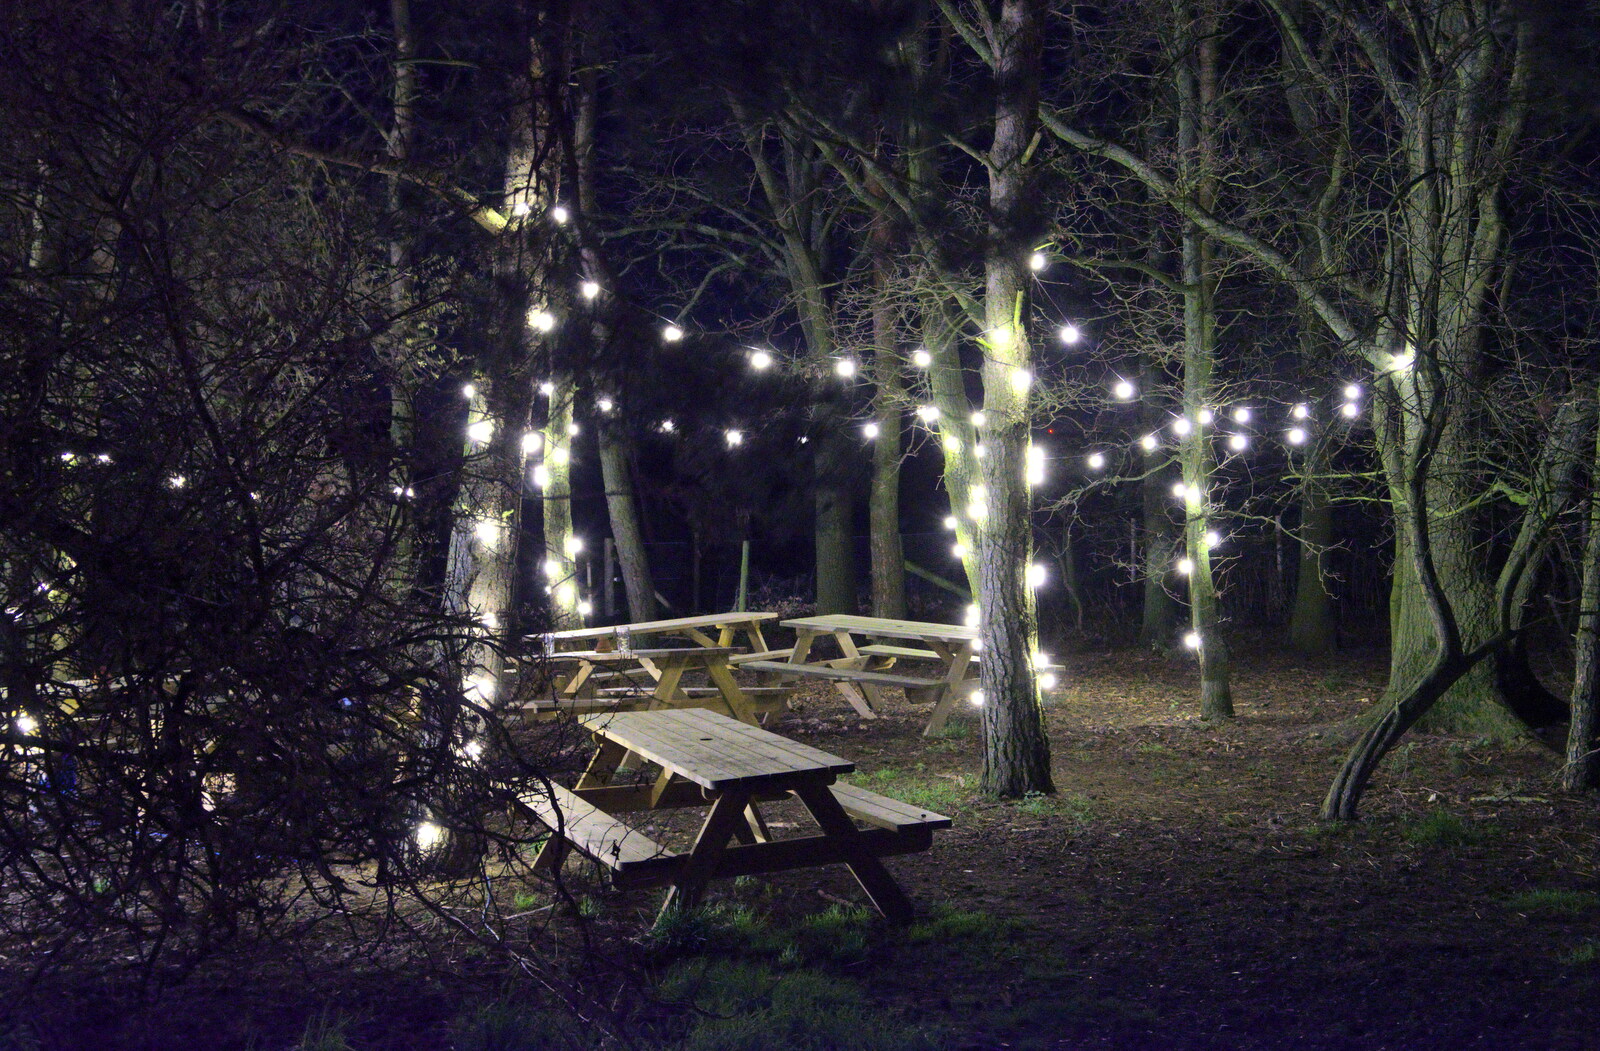 Outside, trees are lit up from The Star Wing Winter Beer Fest, Redgrave, Suffolk - 31st January 2020